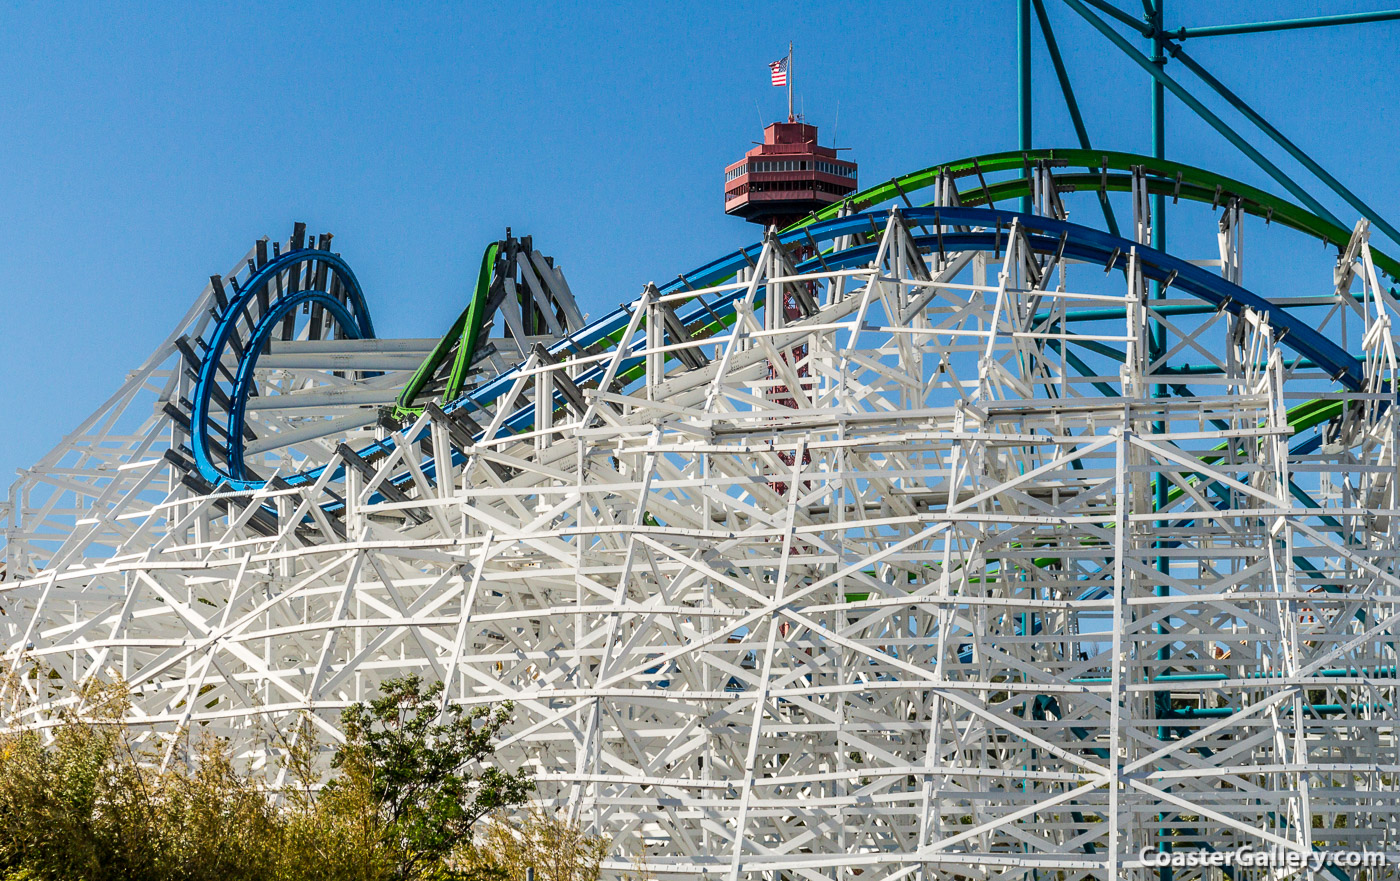 Pictures and information about the Twisted Colossus racing roller coaster